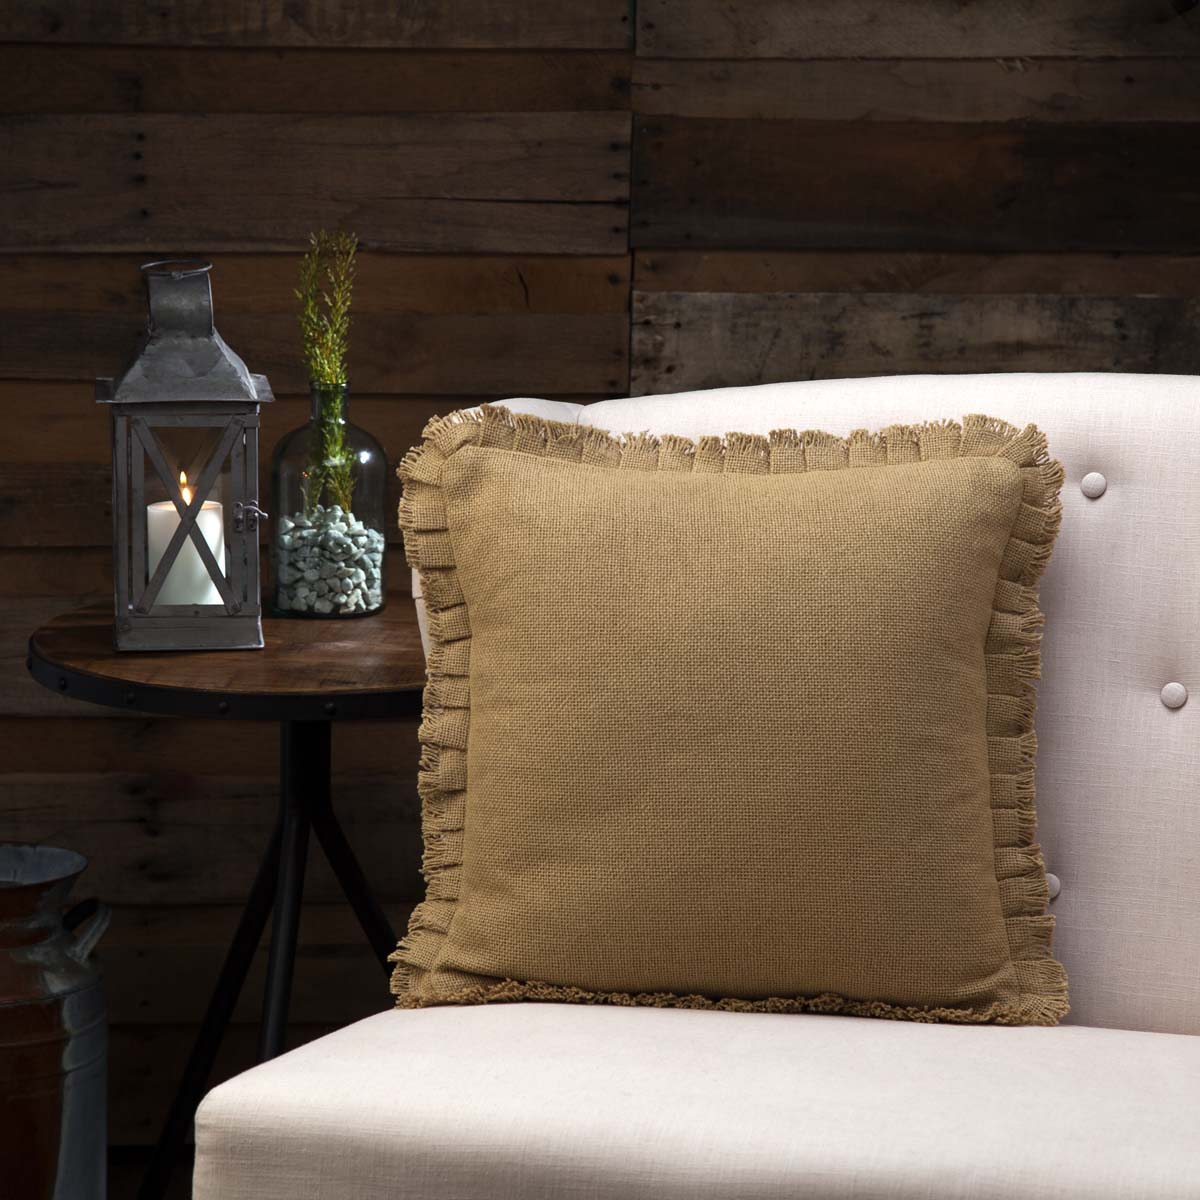 Farmhouse Throw Pillow Cotton Burlap Fringed Ruffle Solid Color 16x16 VHC Brands